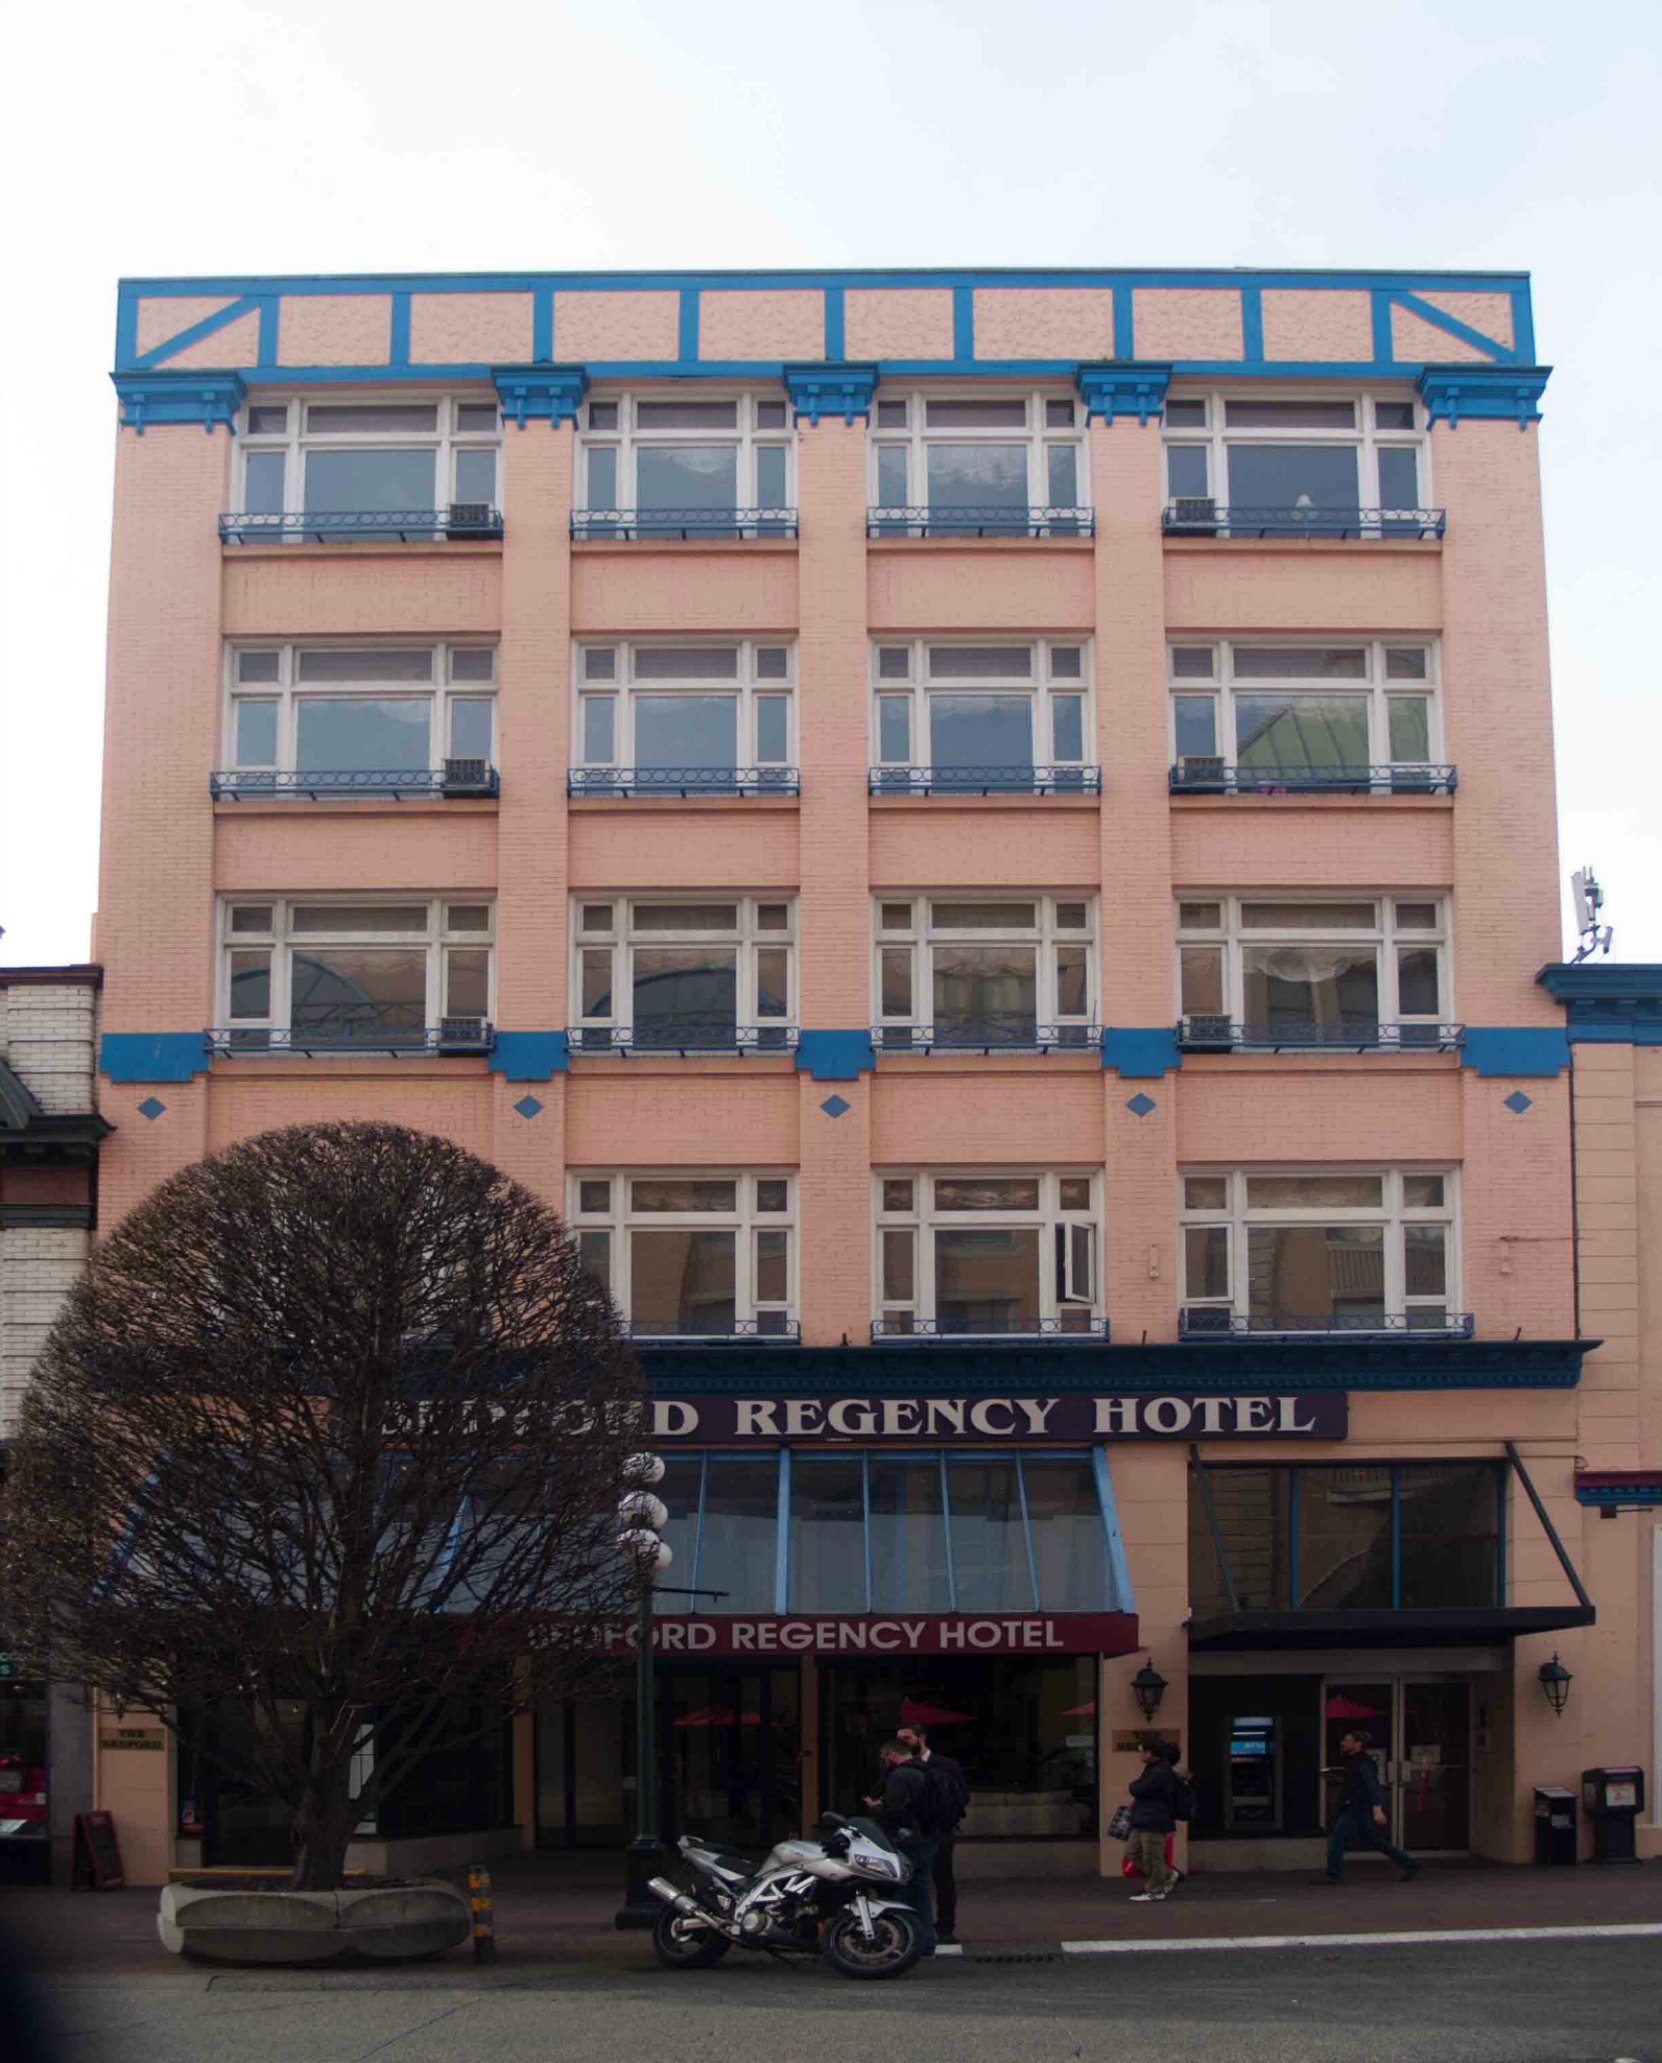 The Bedford Regency Hotel, 1140 Government Street, is in a building that was originally built by architect Thomas Hooper in 1910 for Hibben-Bone Stationers